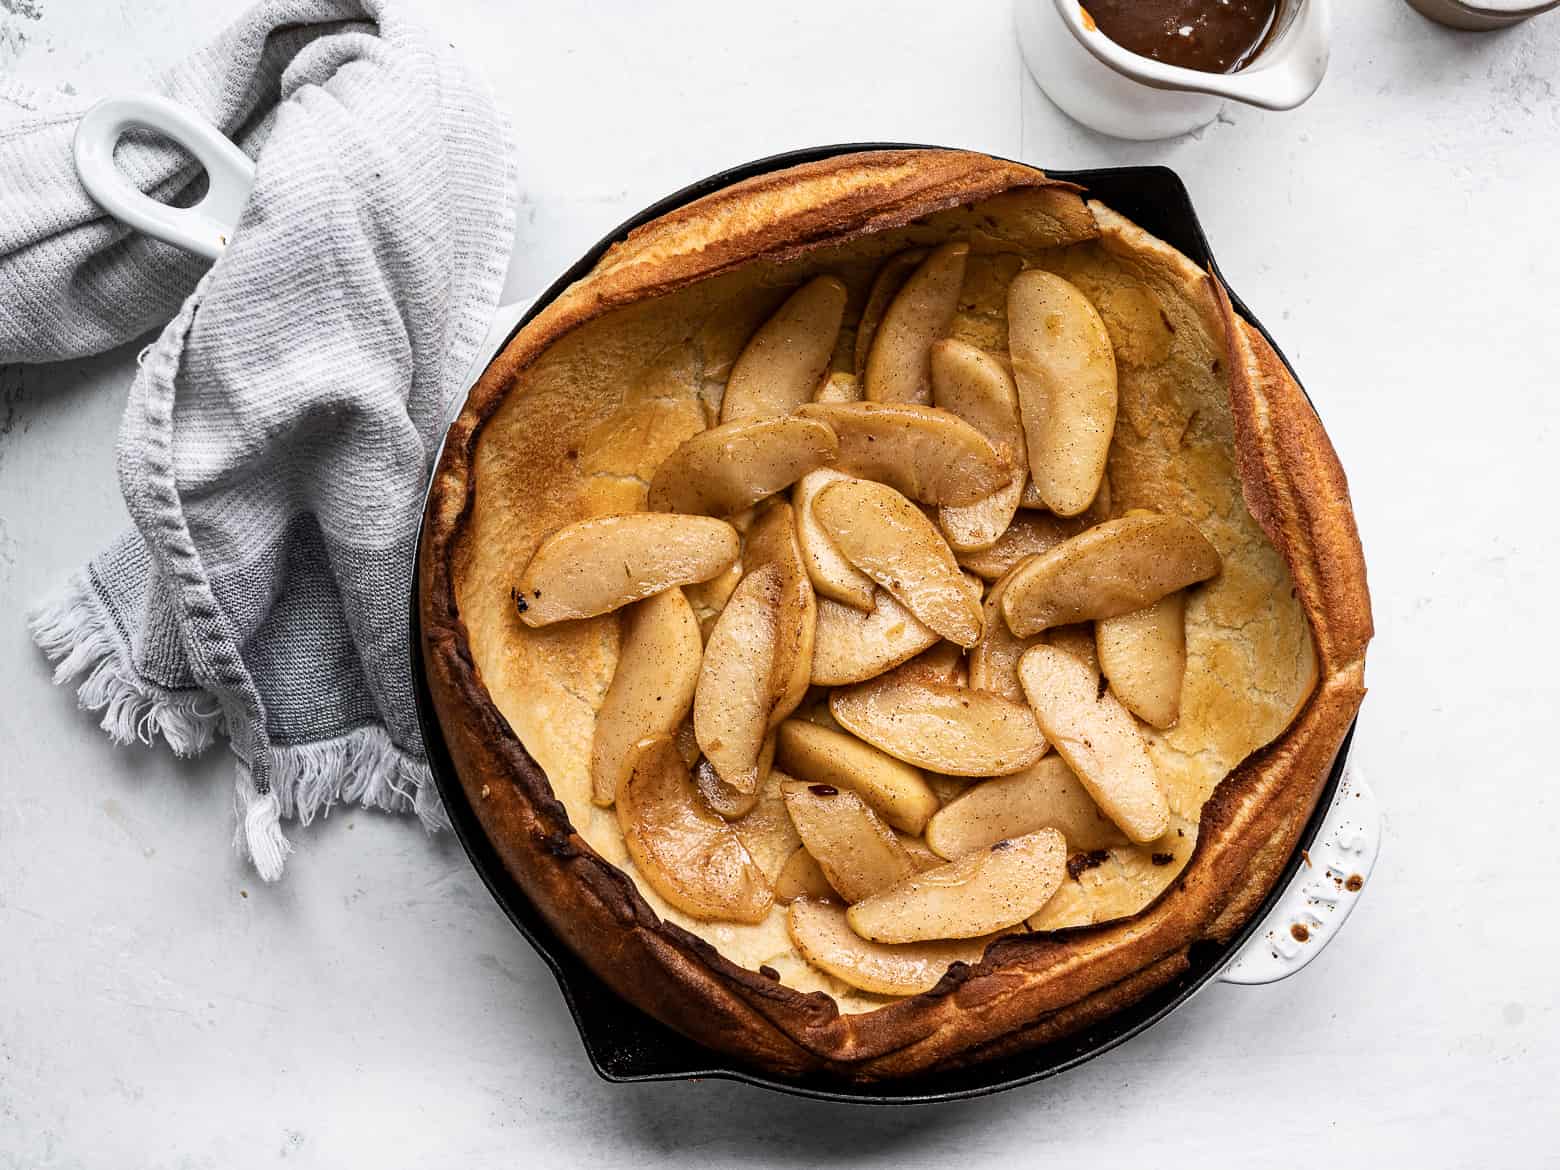 Dutch baby topped with caramelized apples